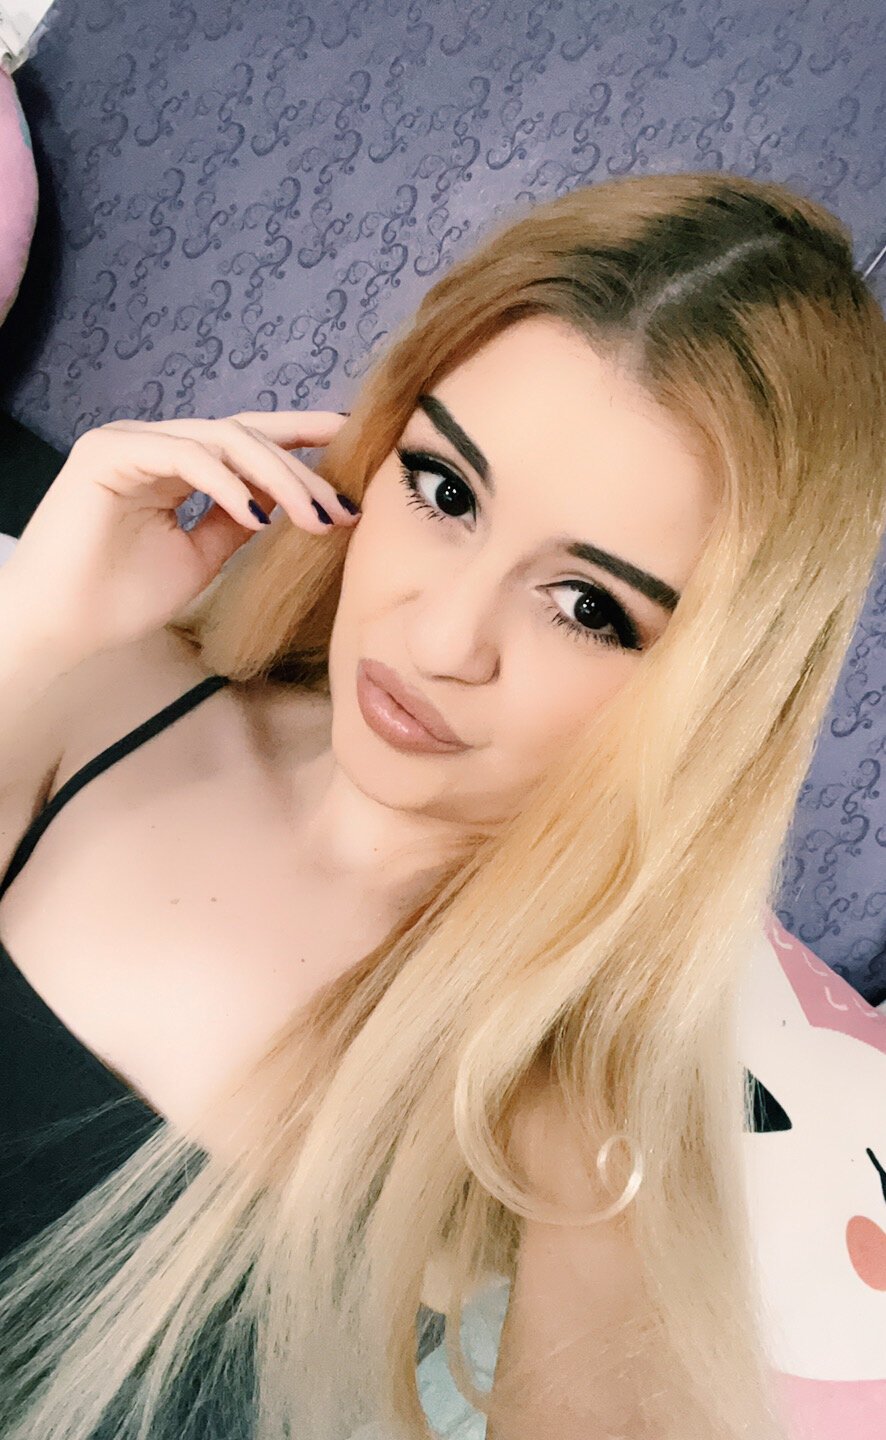 nicollewetpussy live cam model at StripChat